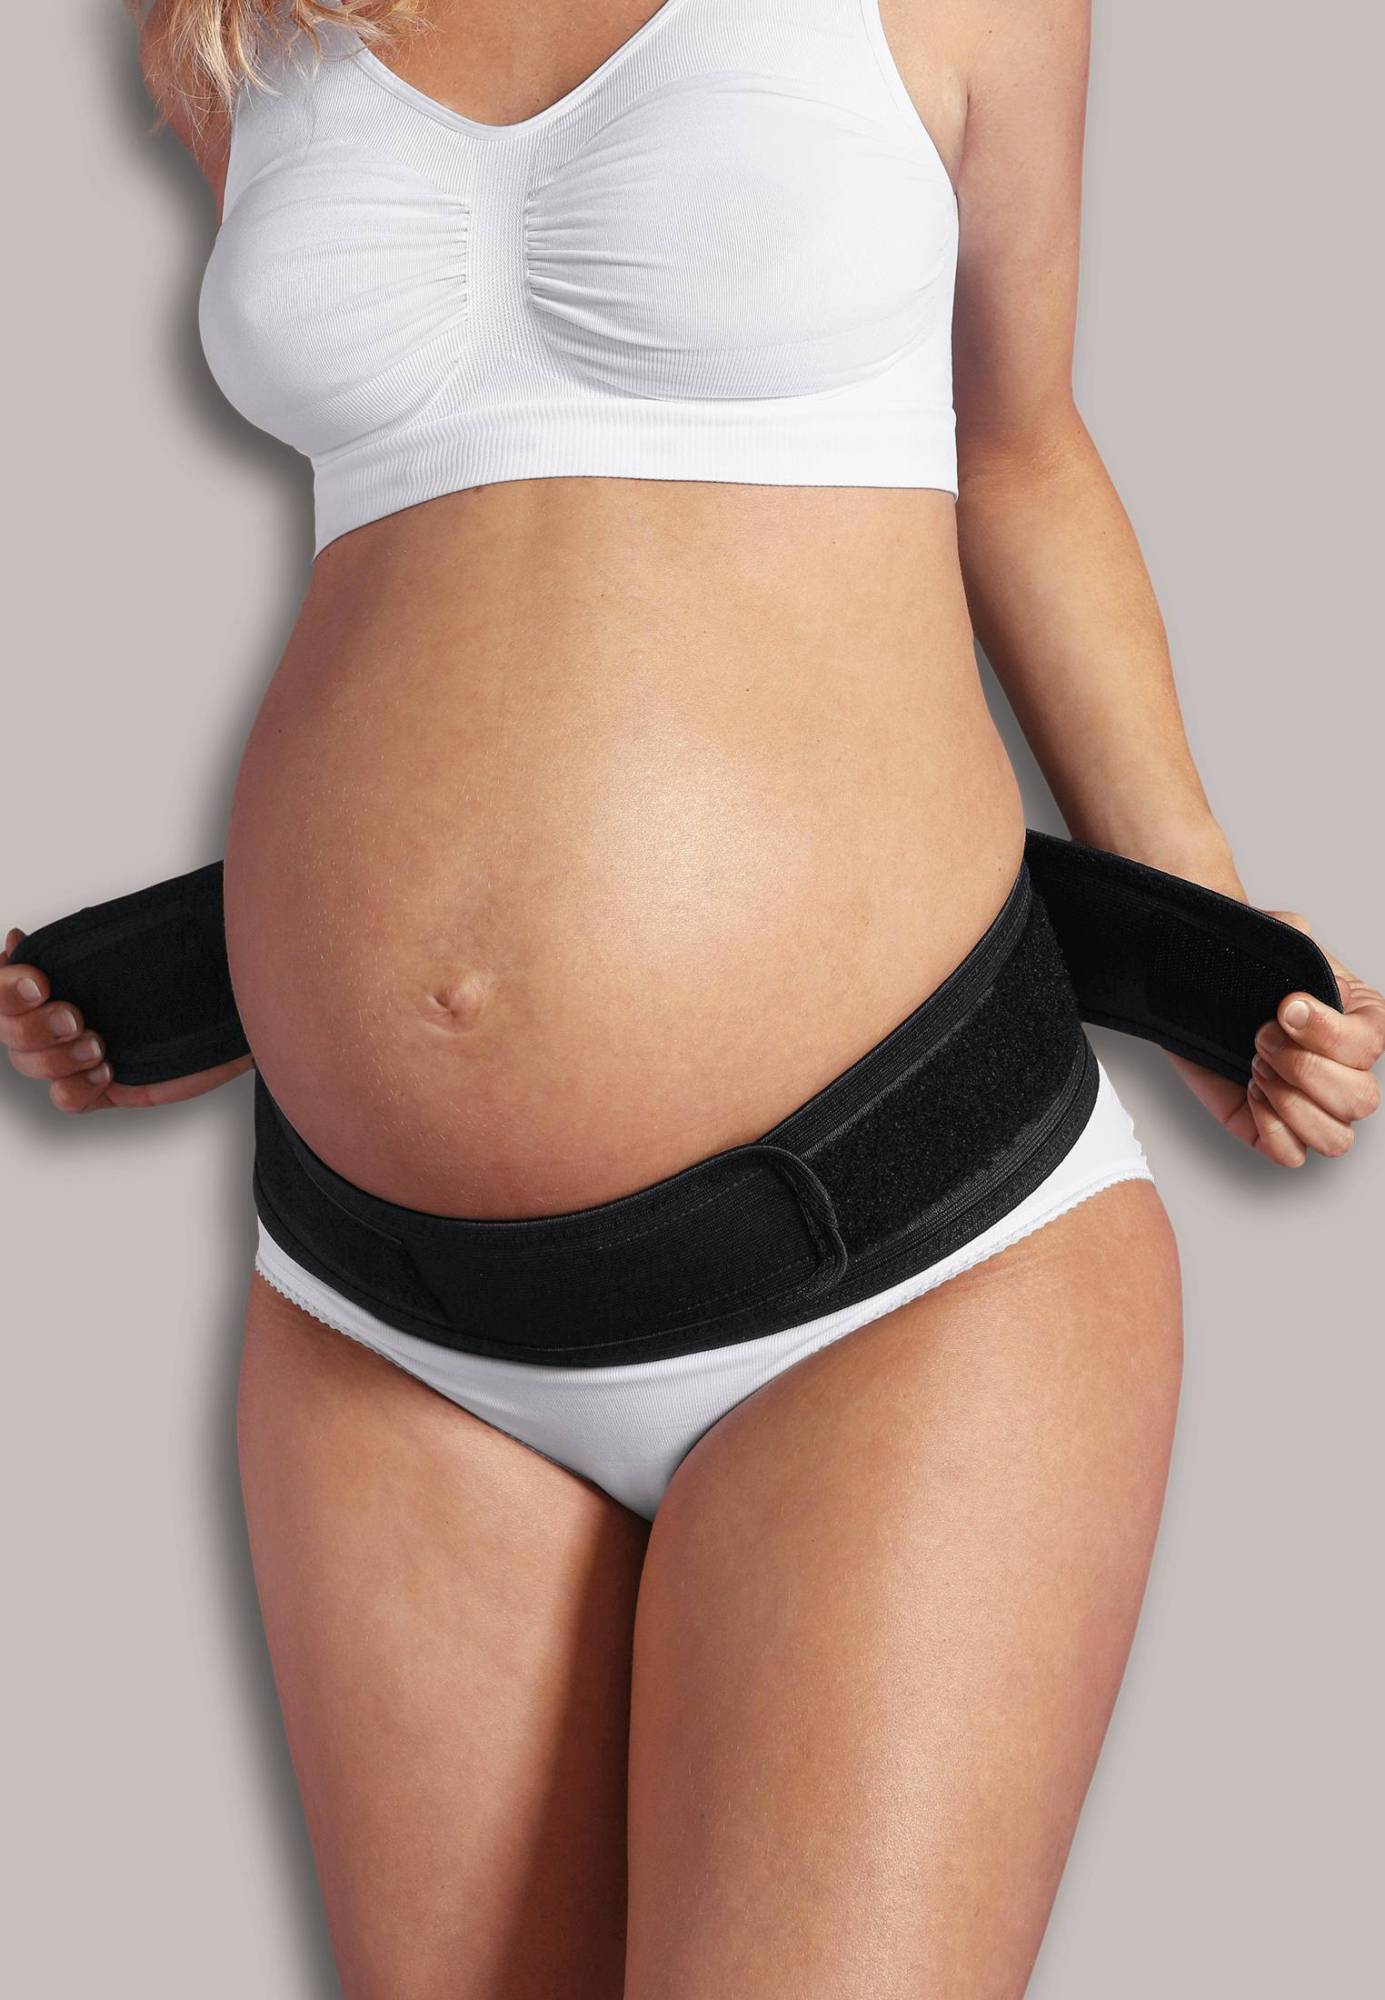 Carriwell - Maternity Support Band - White, Shop Today. Get it Tomorrow!